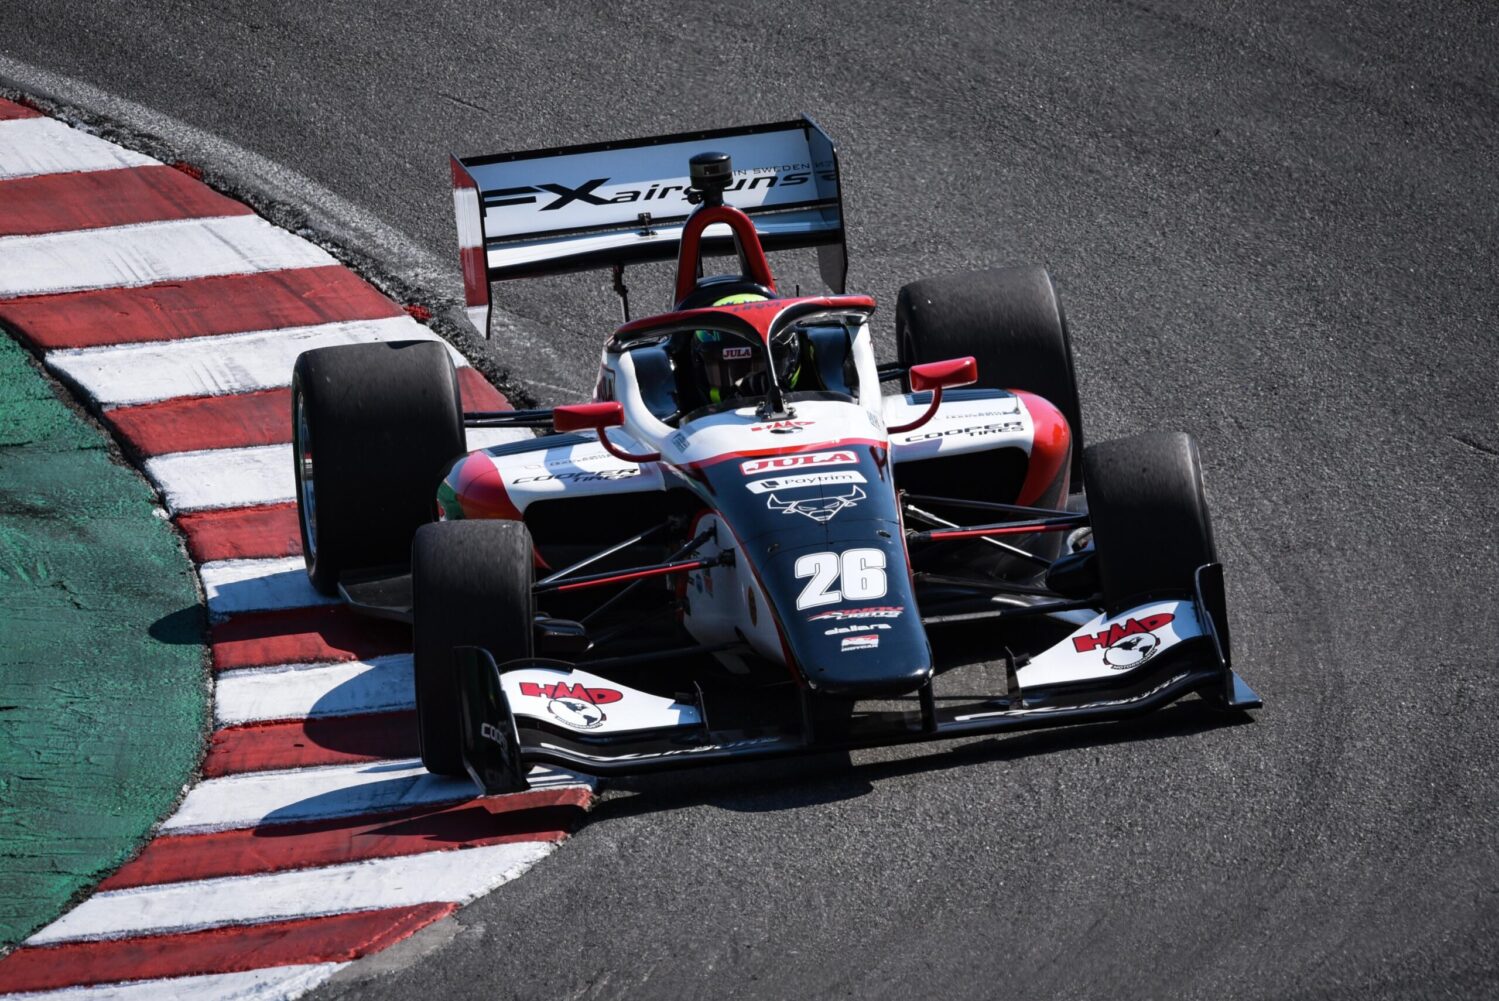 Indy Lights: Lundqvist Claims Indy Lights 2022 Championship